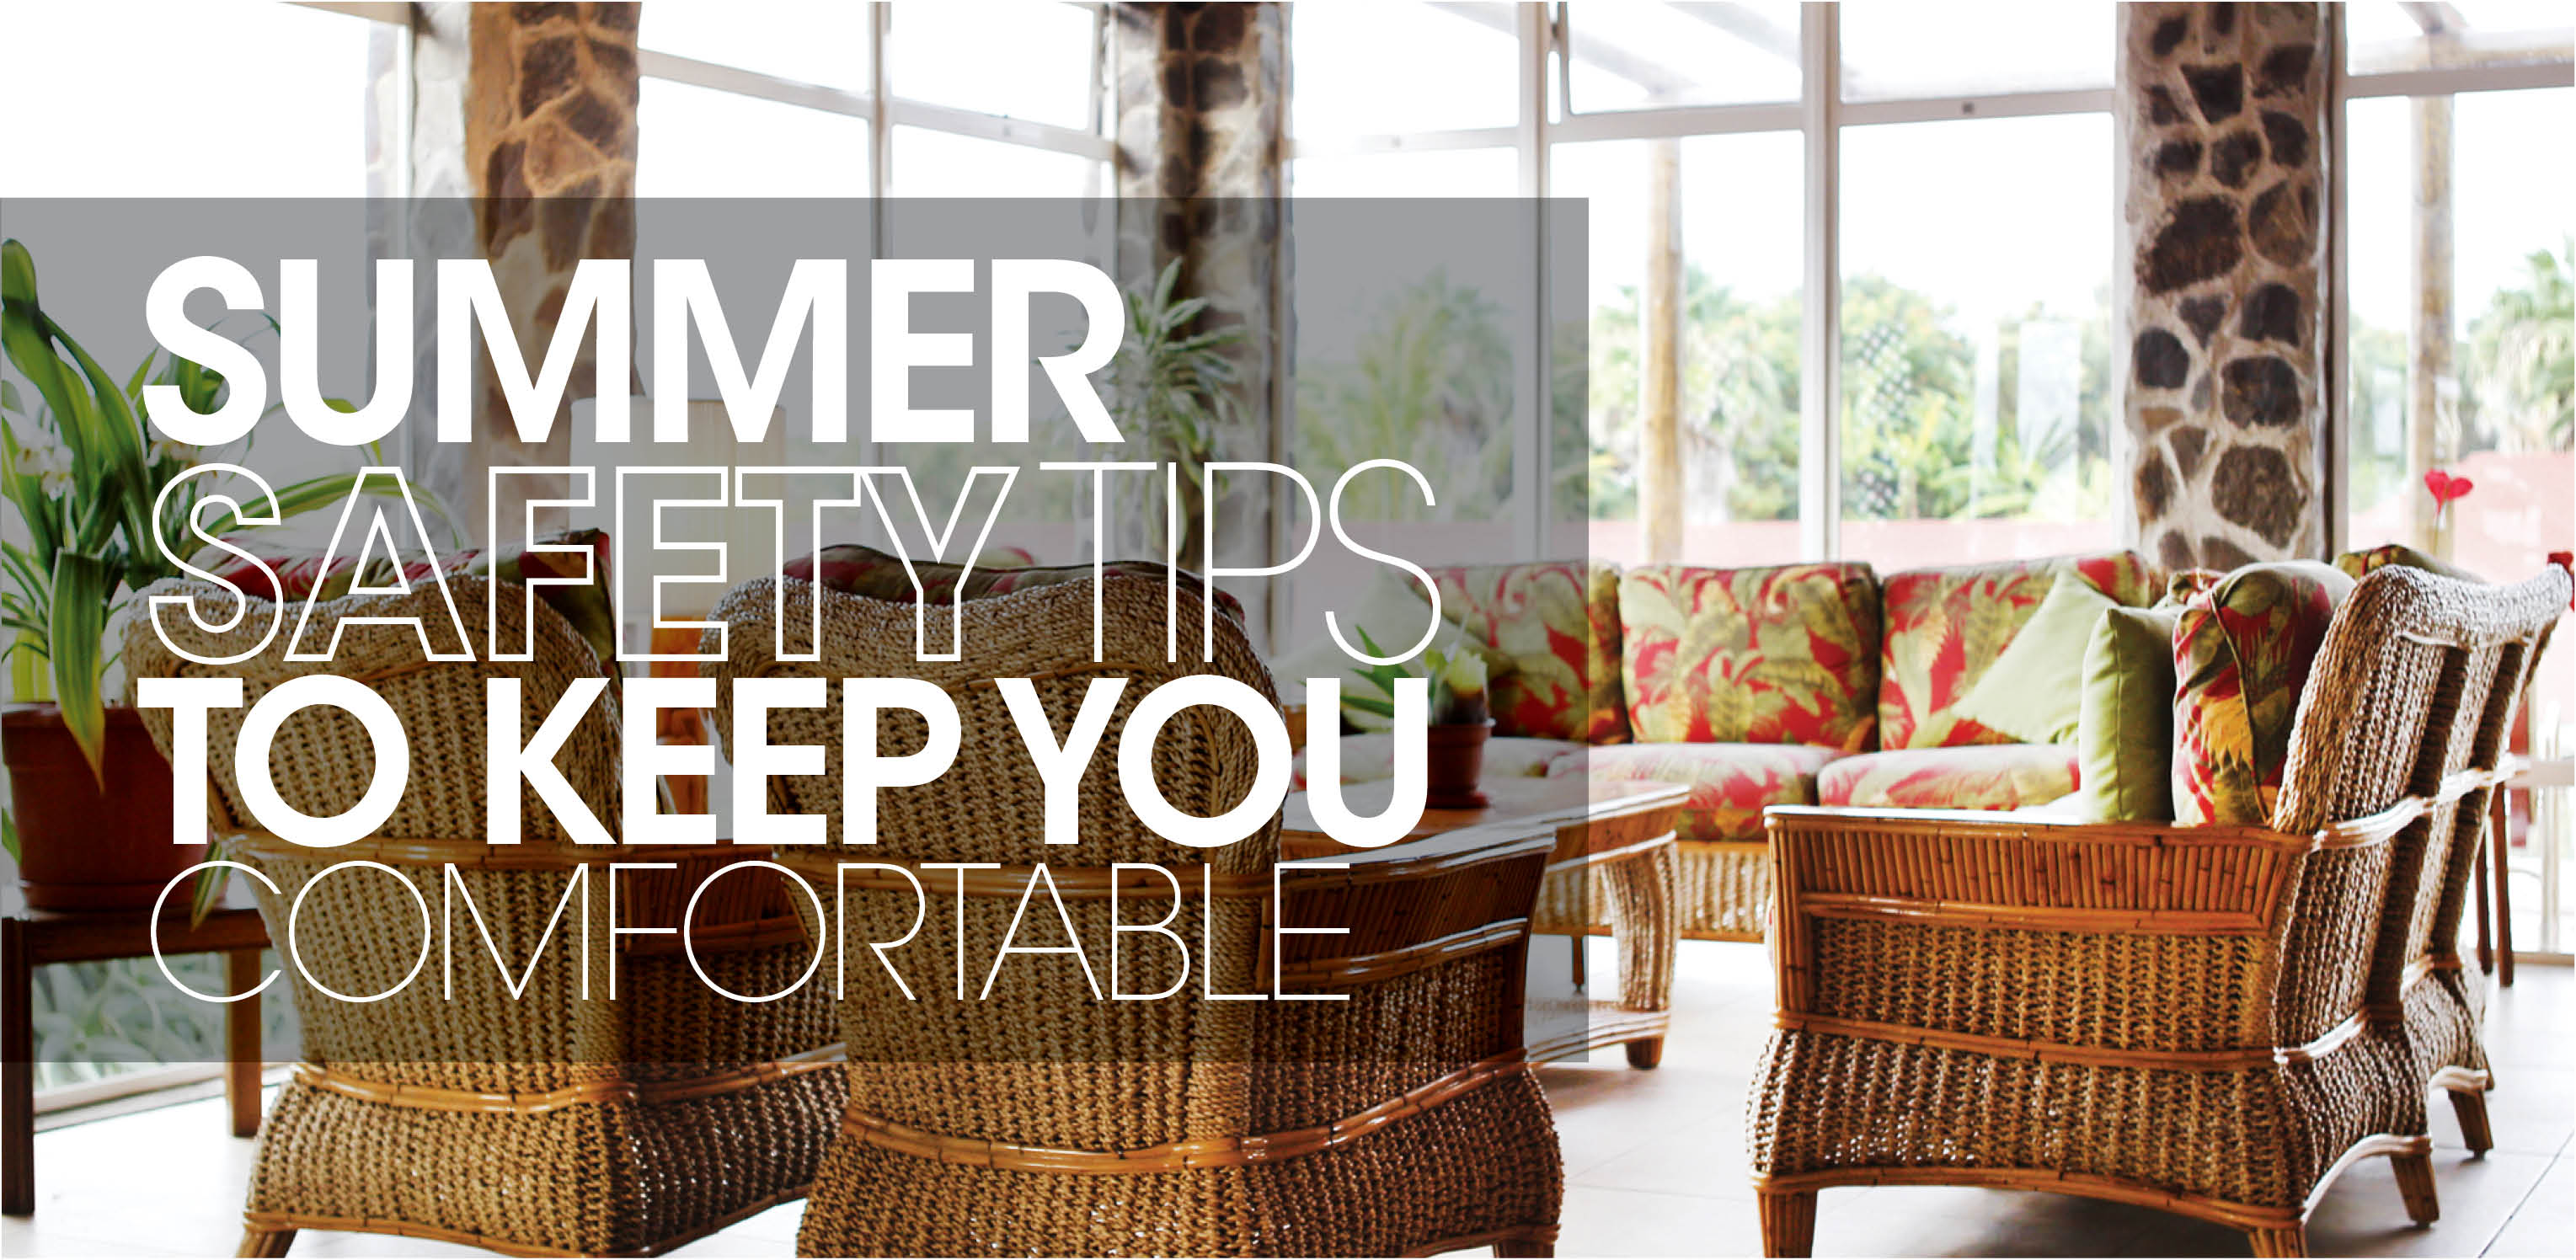 Wicker furniture with text: "summer safety tips to keep you comfortable"